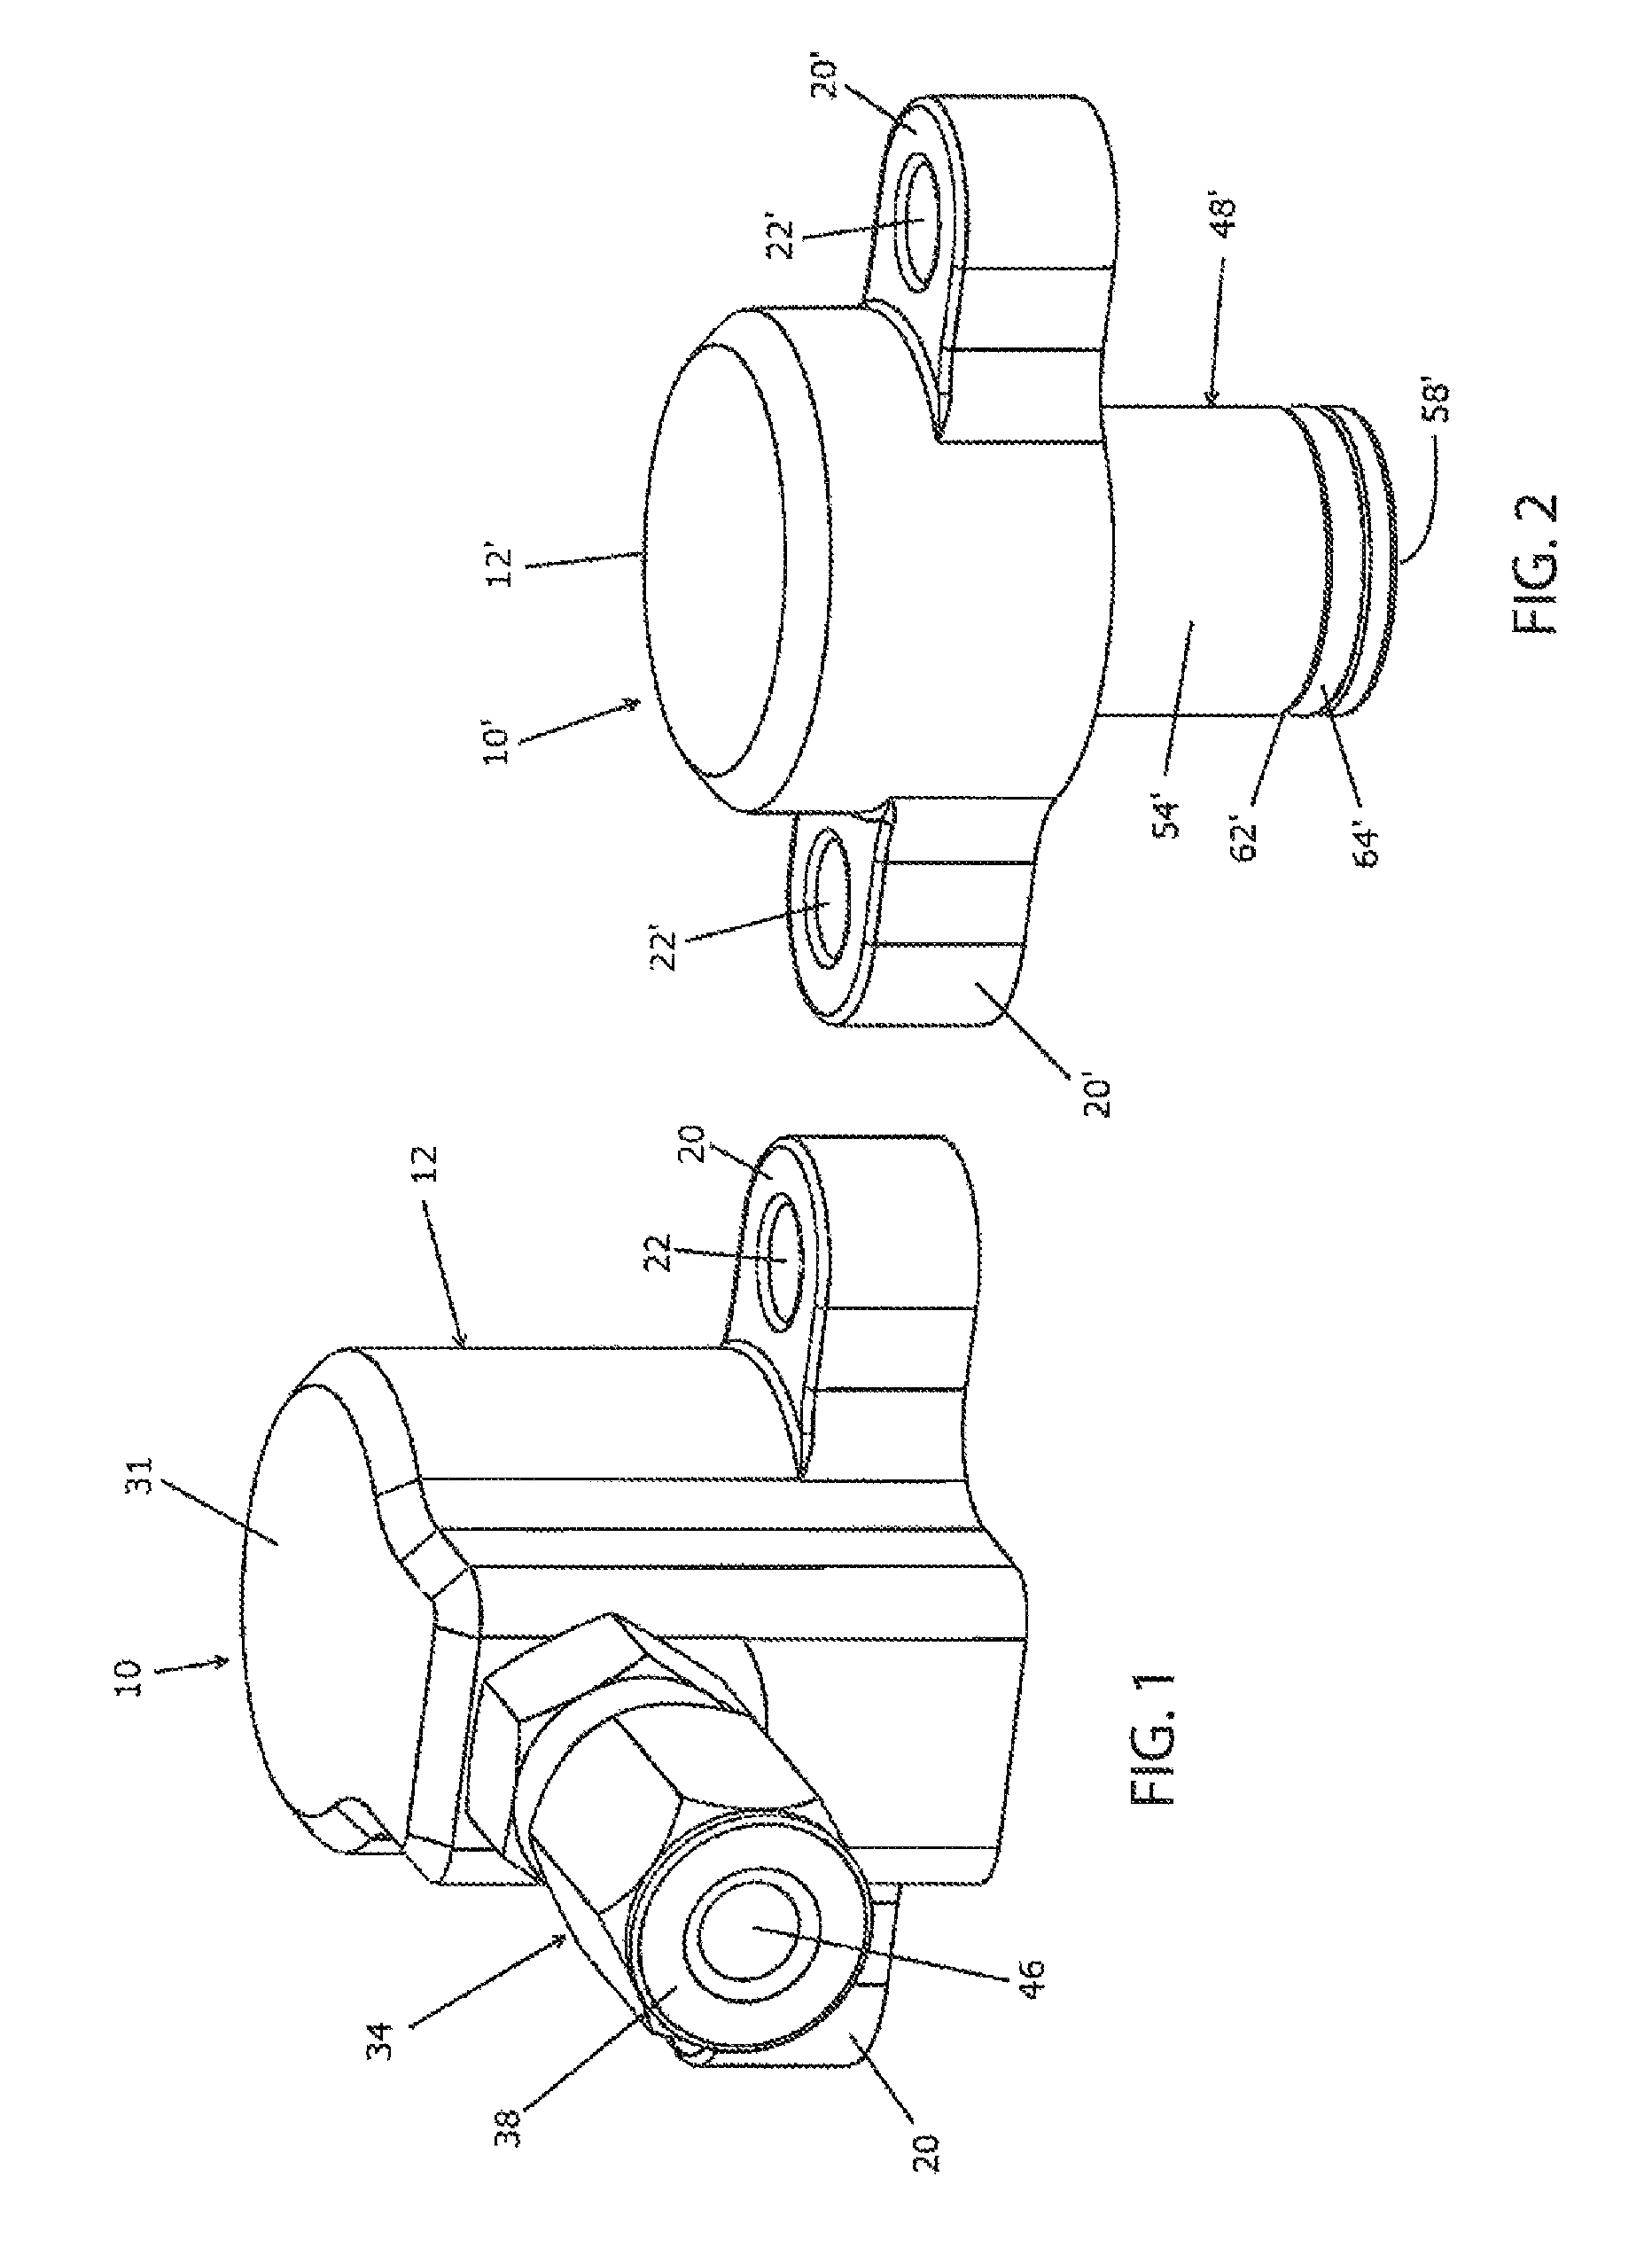 Central tire inflation wheel assembly, valve and central tire inflation system